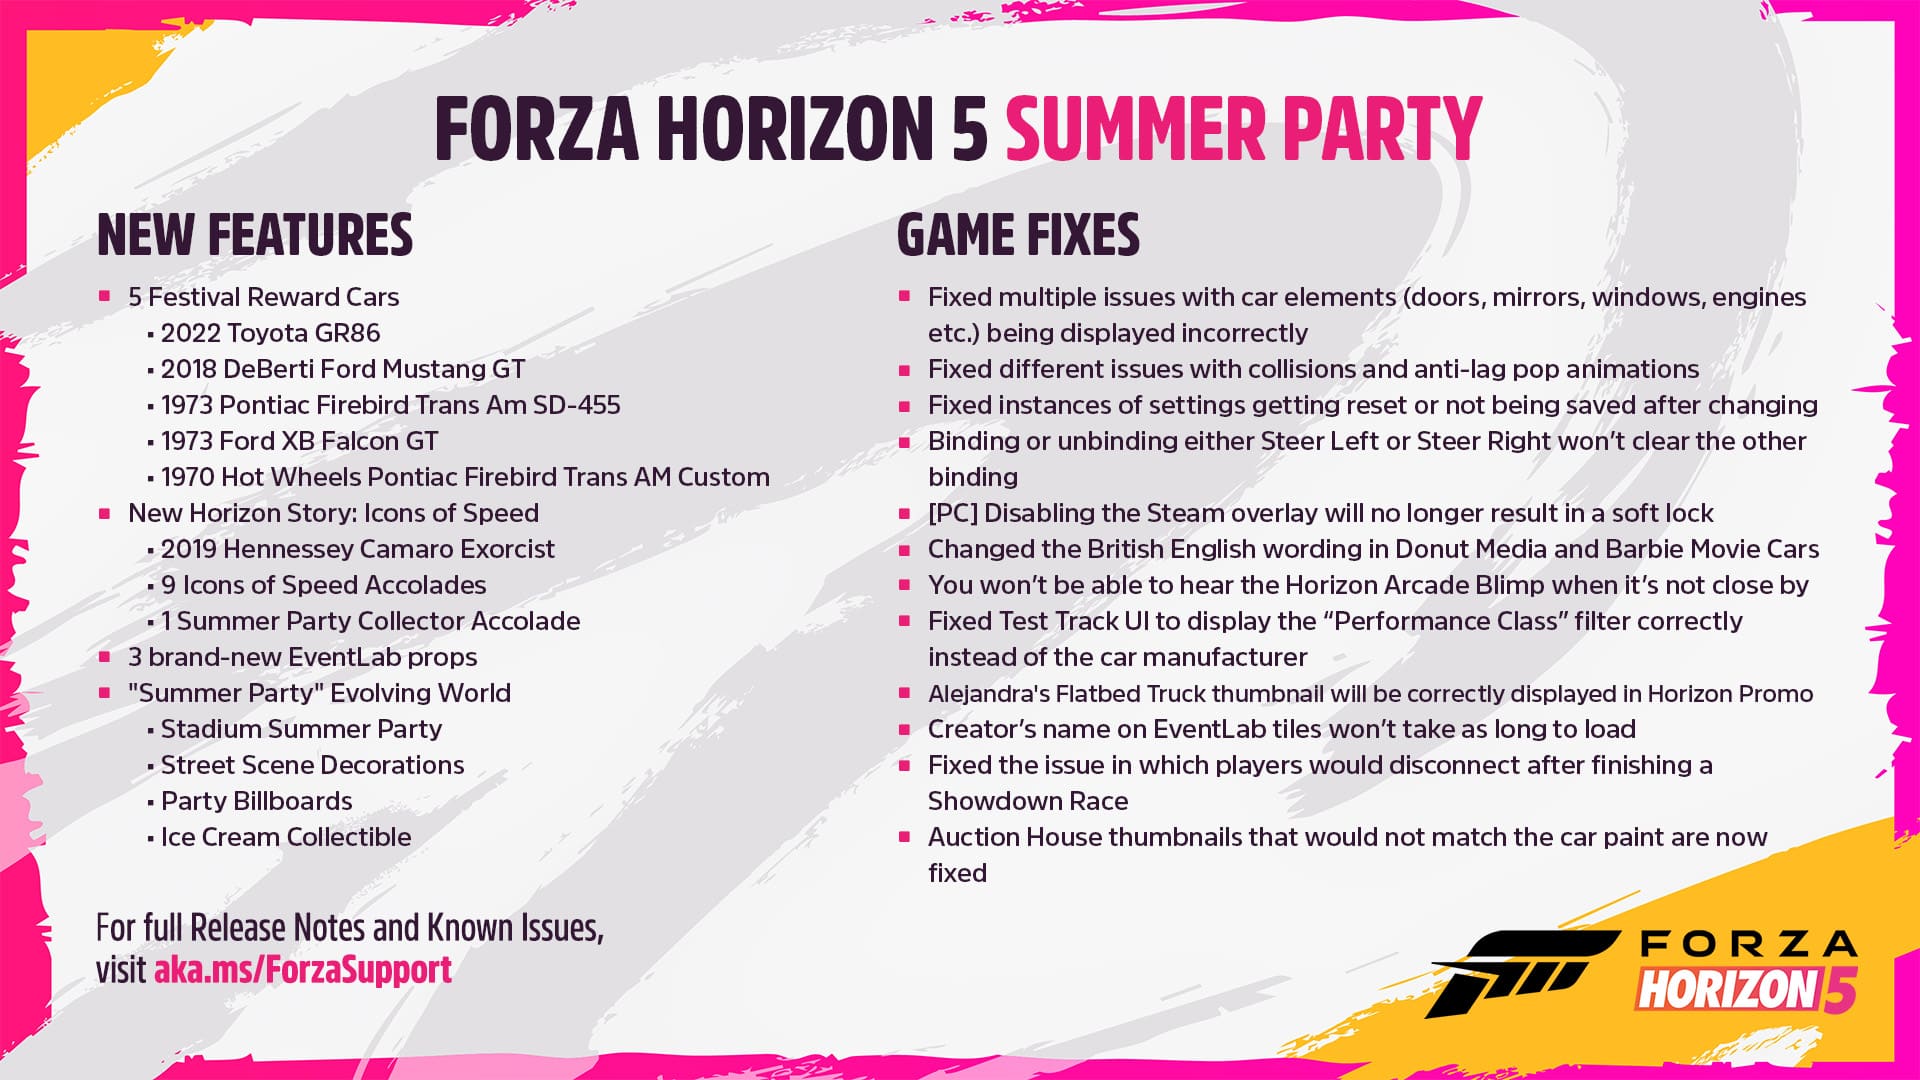 Forza Horizon 5 Update for July 18